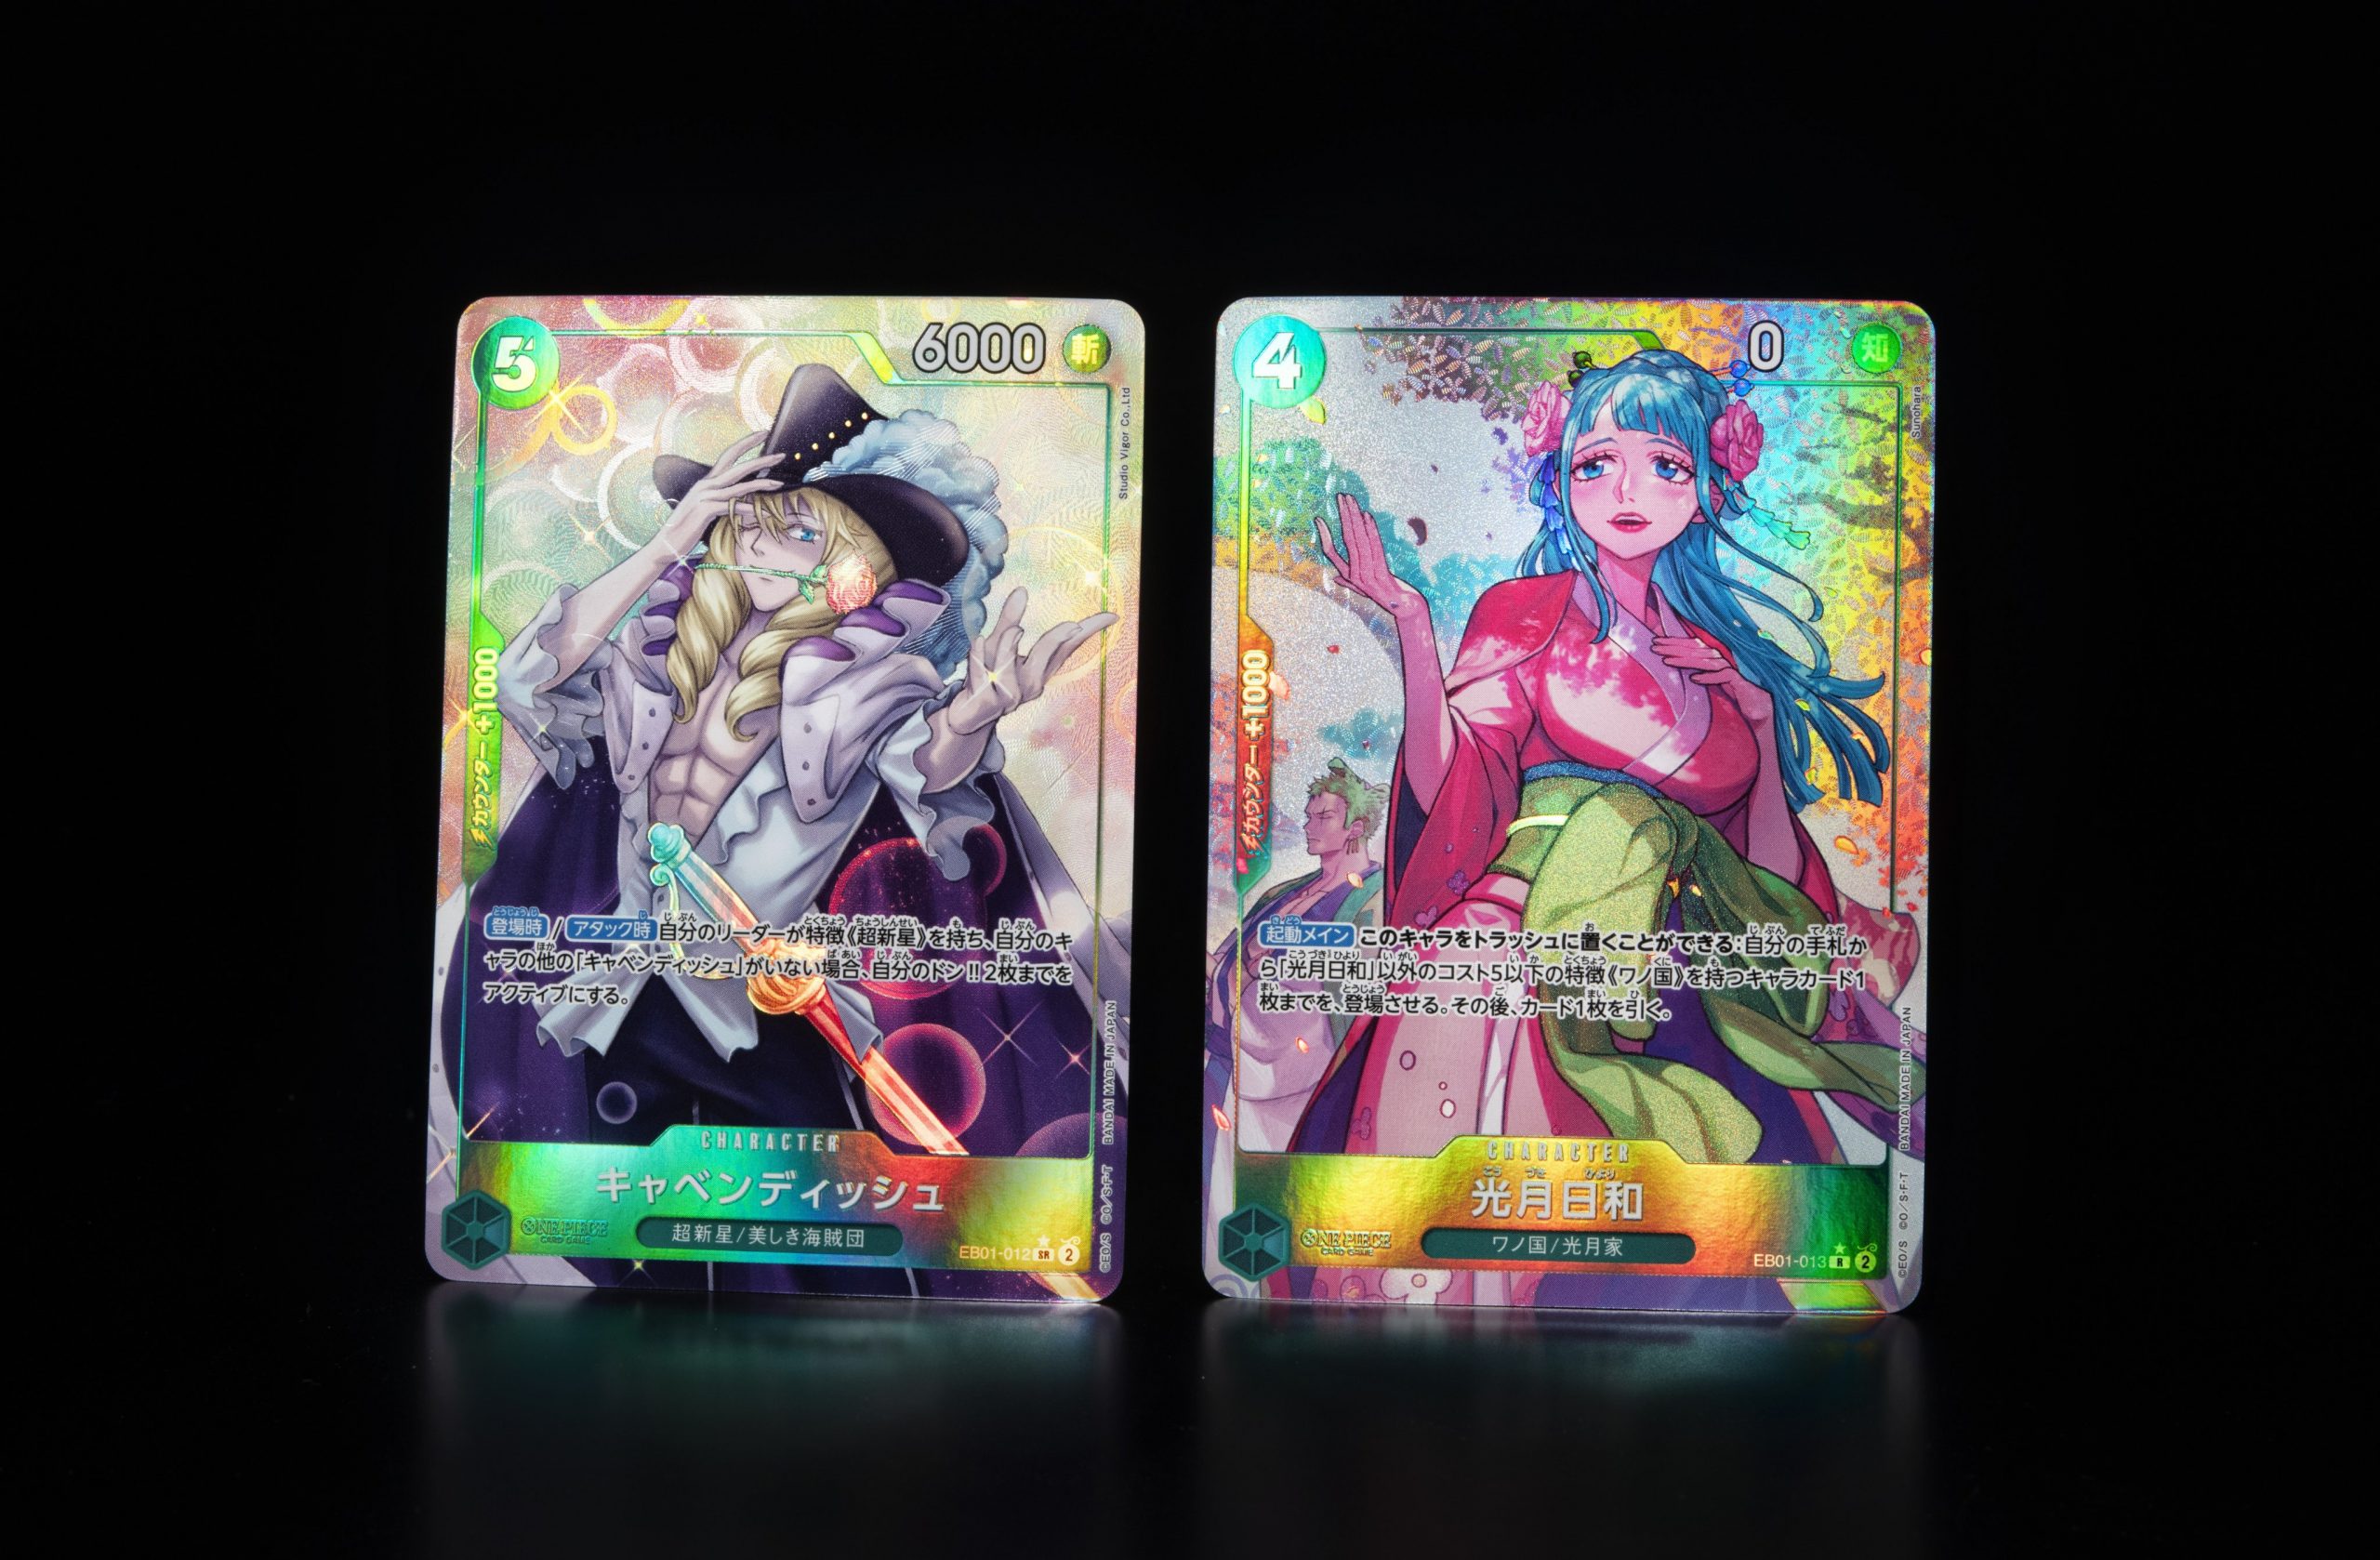 One Piece Card Game Extra Booster – Precious Stories EB-01 Card